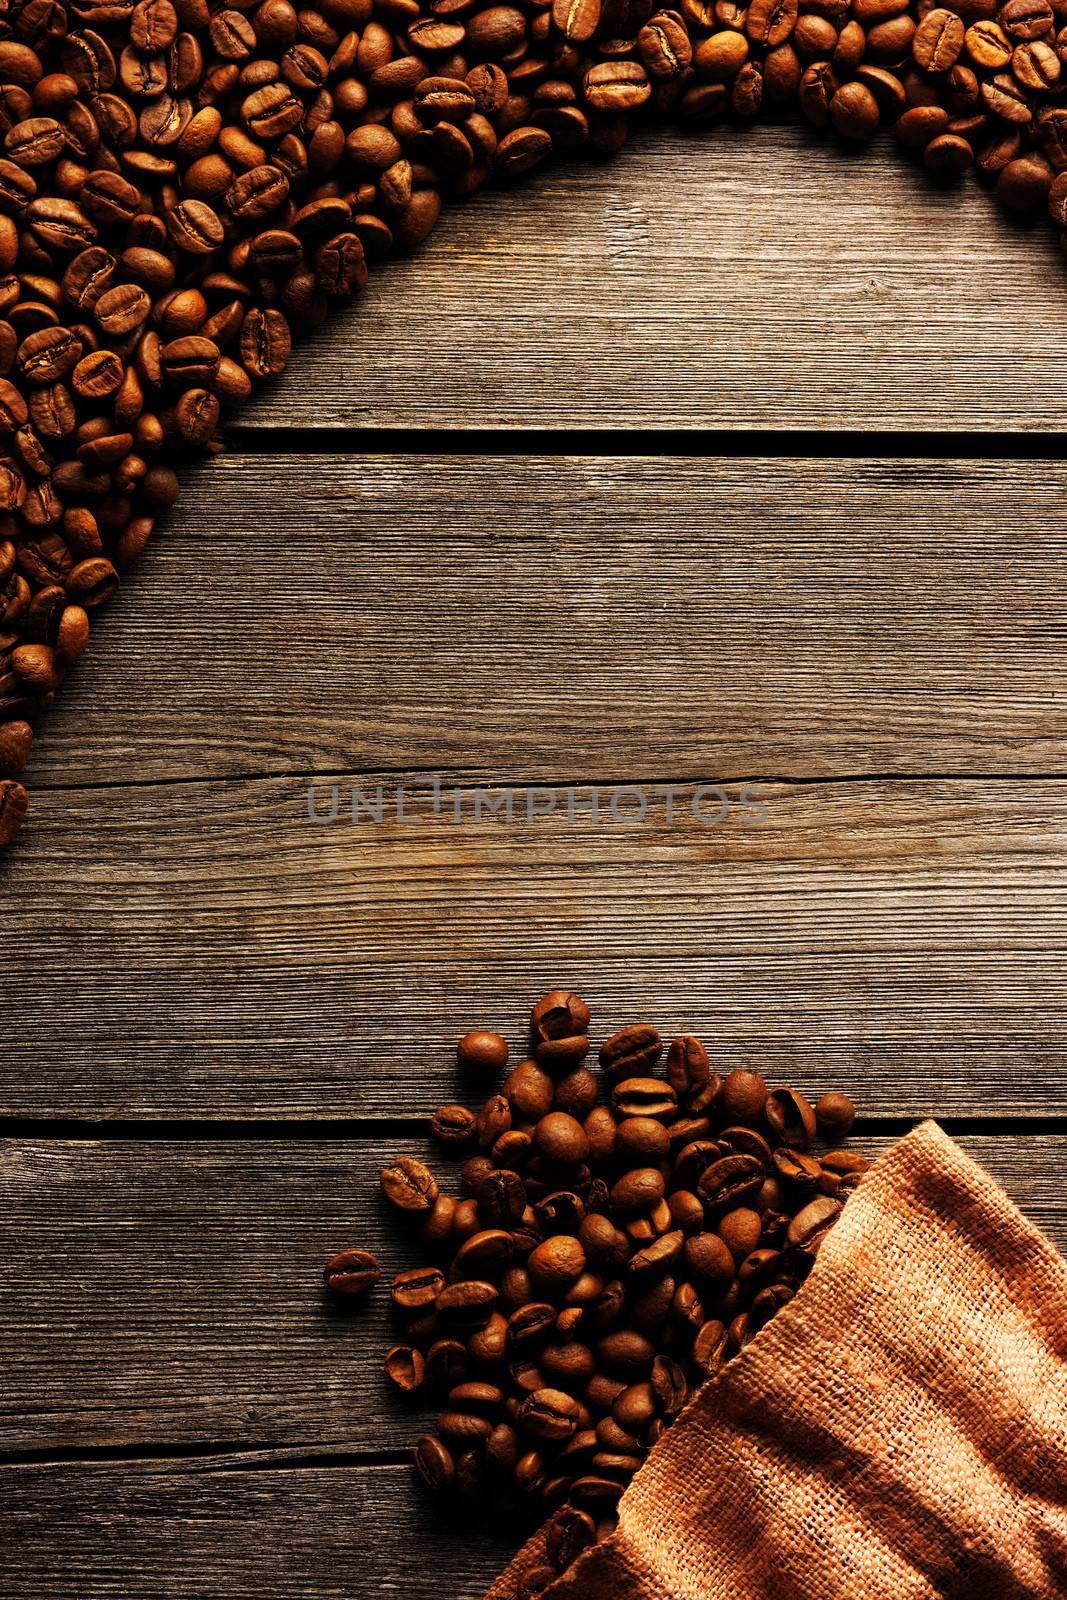 Coffee beans and bag background by haveseen